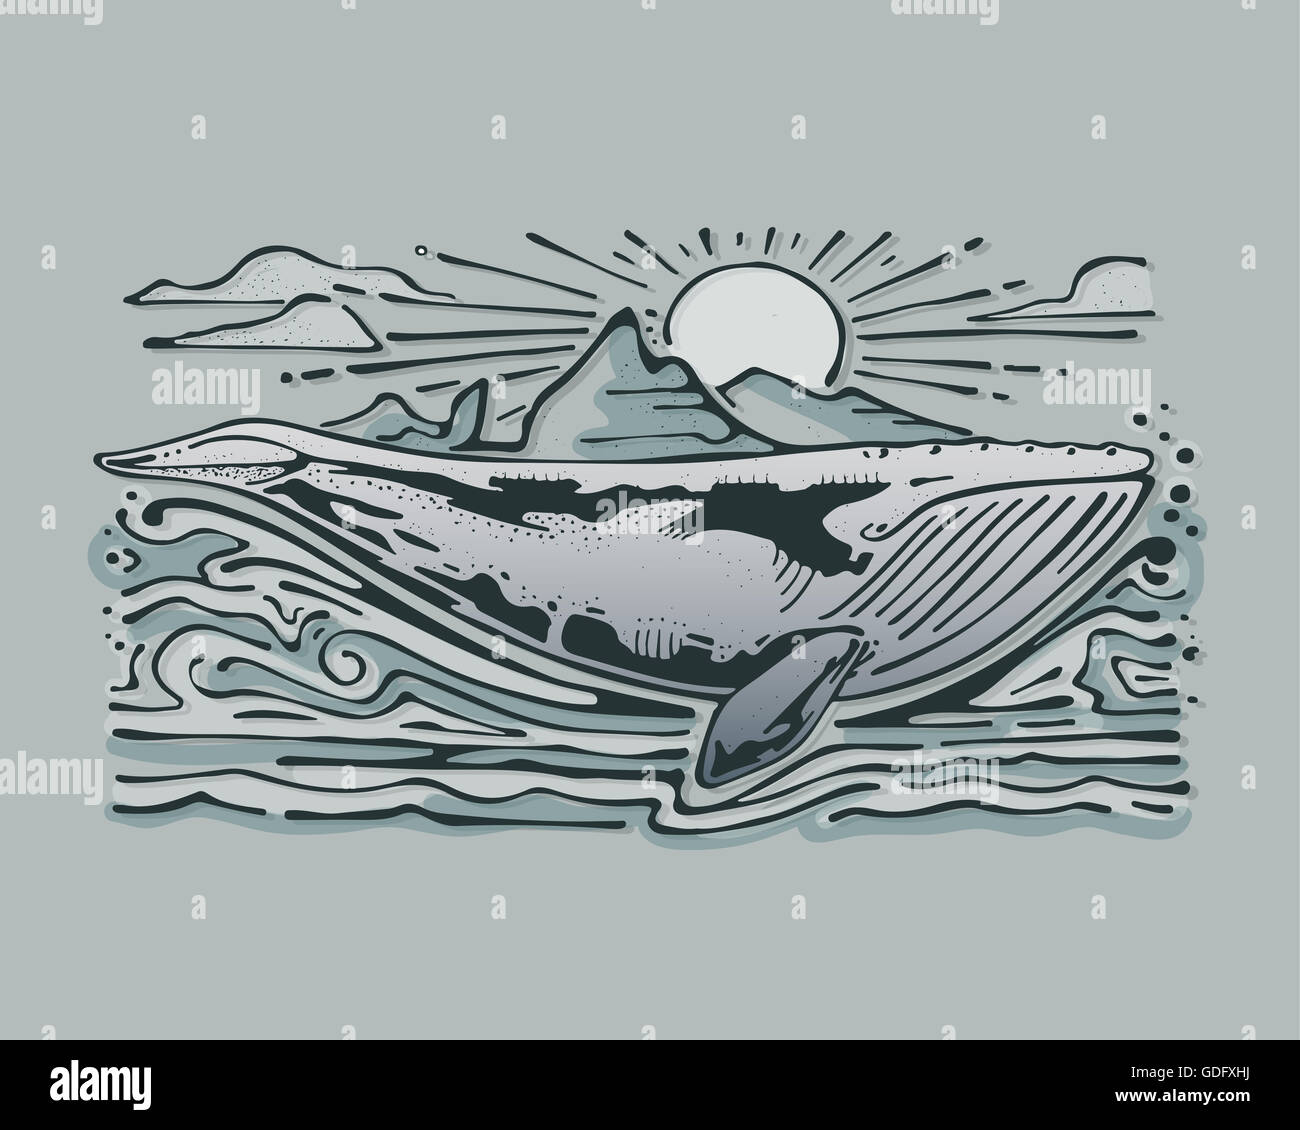 Hand drawn illustration and drawing of a whale in the sea Stock Photo